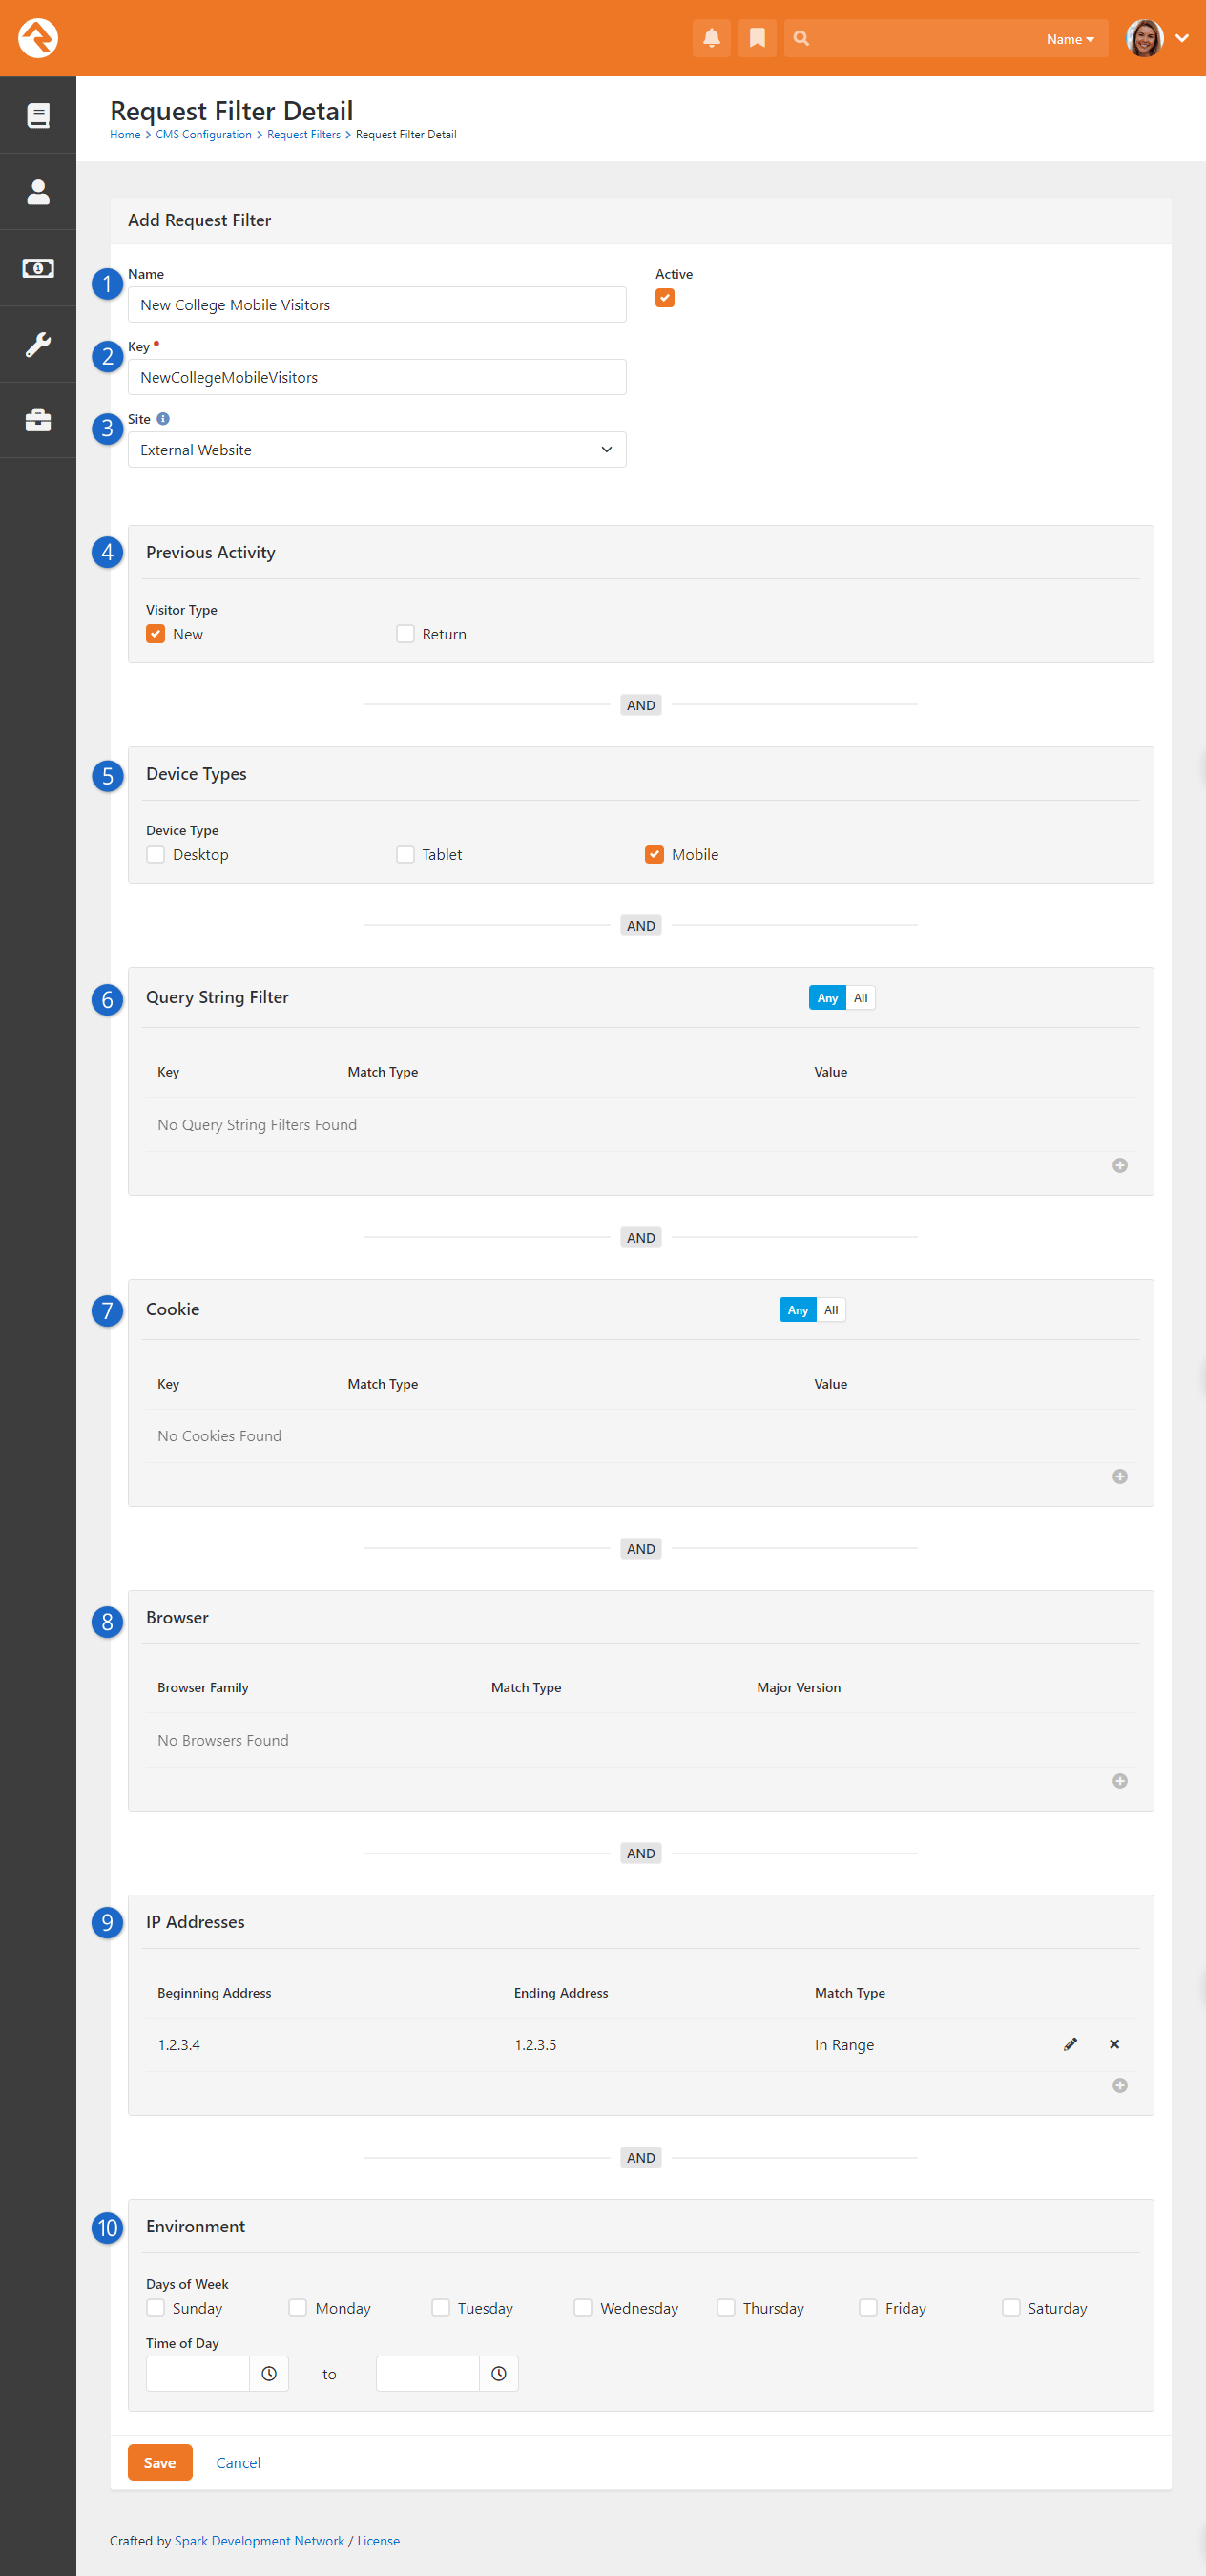 Request Filters